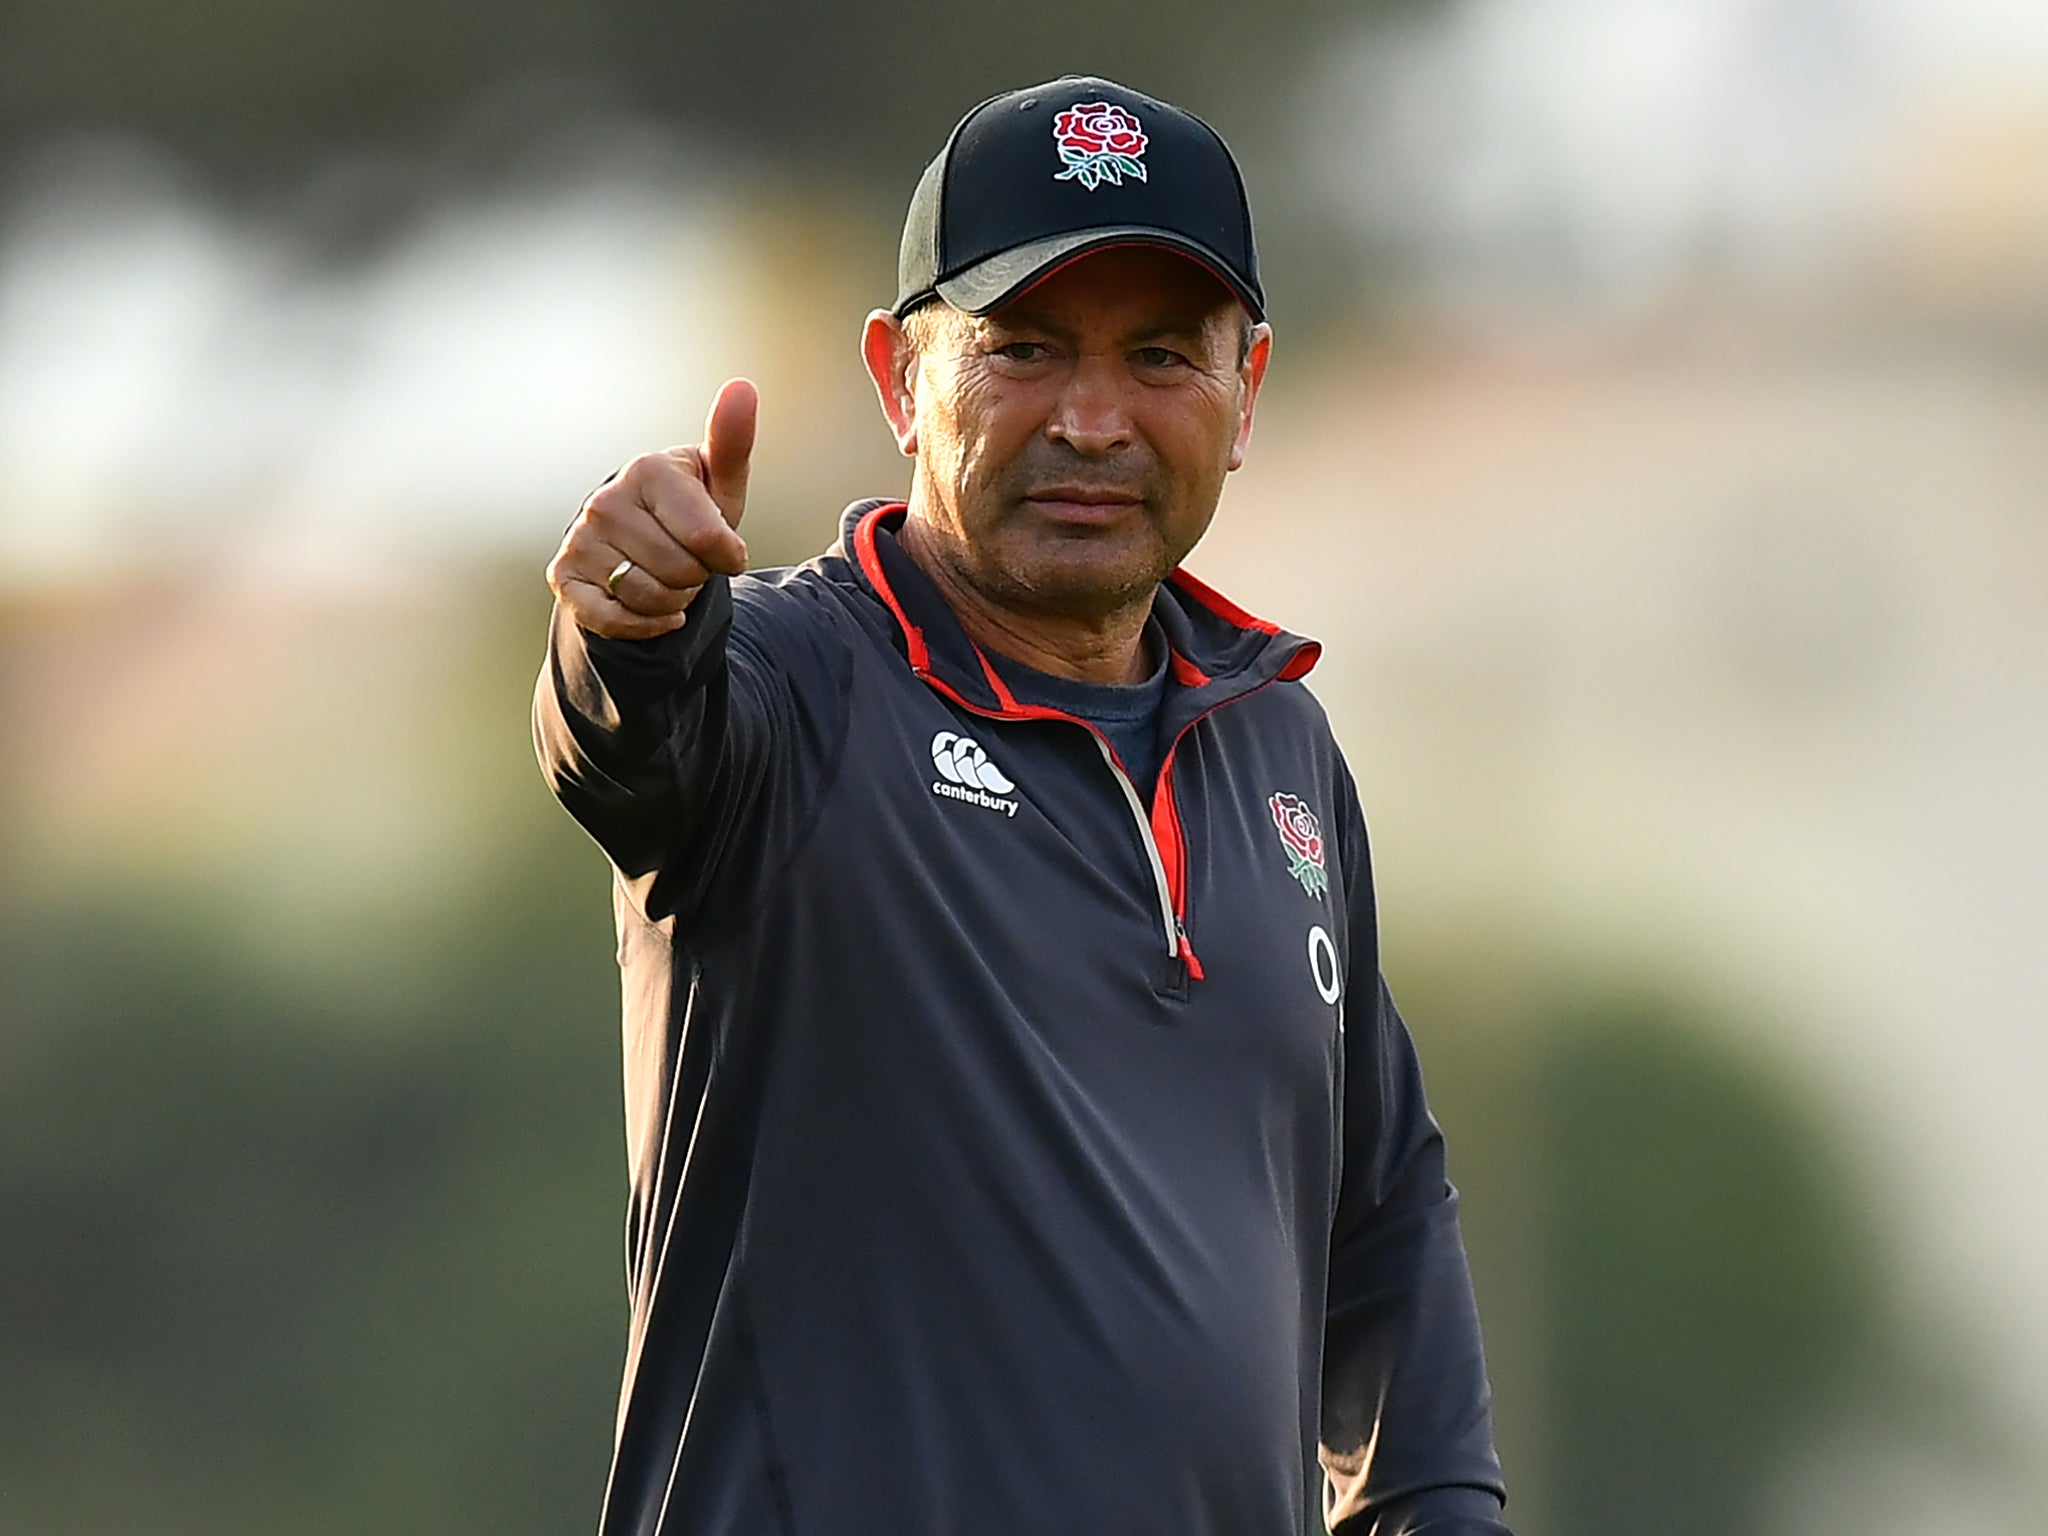 Eddie Jones will lead his England side against Tonga at the 2019 Rugby World Cup